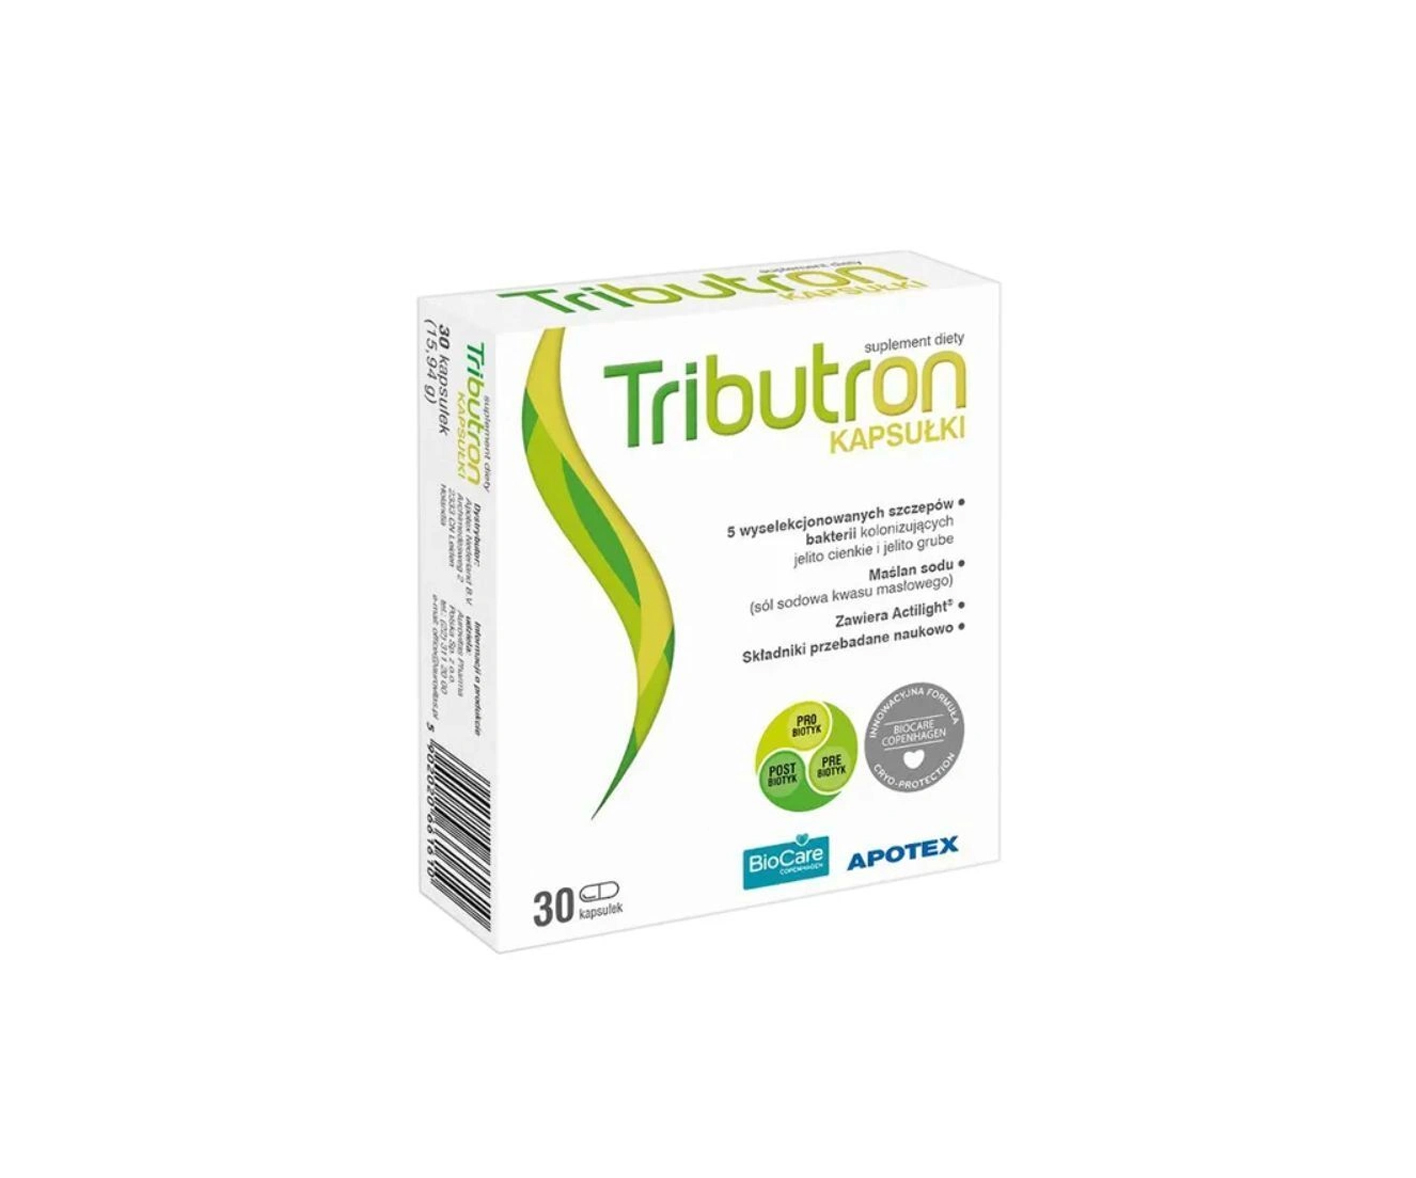 Tributron, a synbiotic for adults